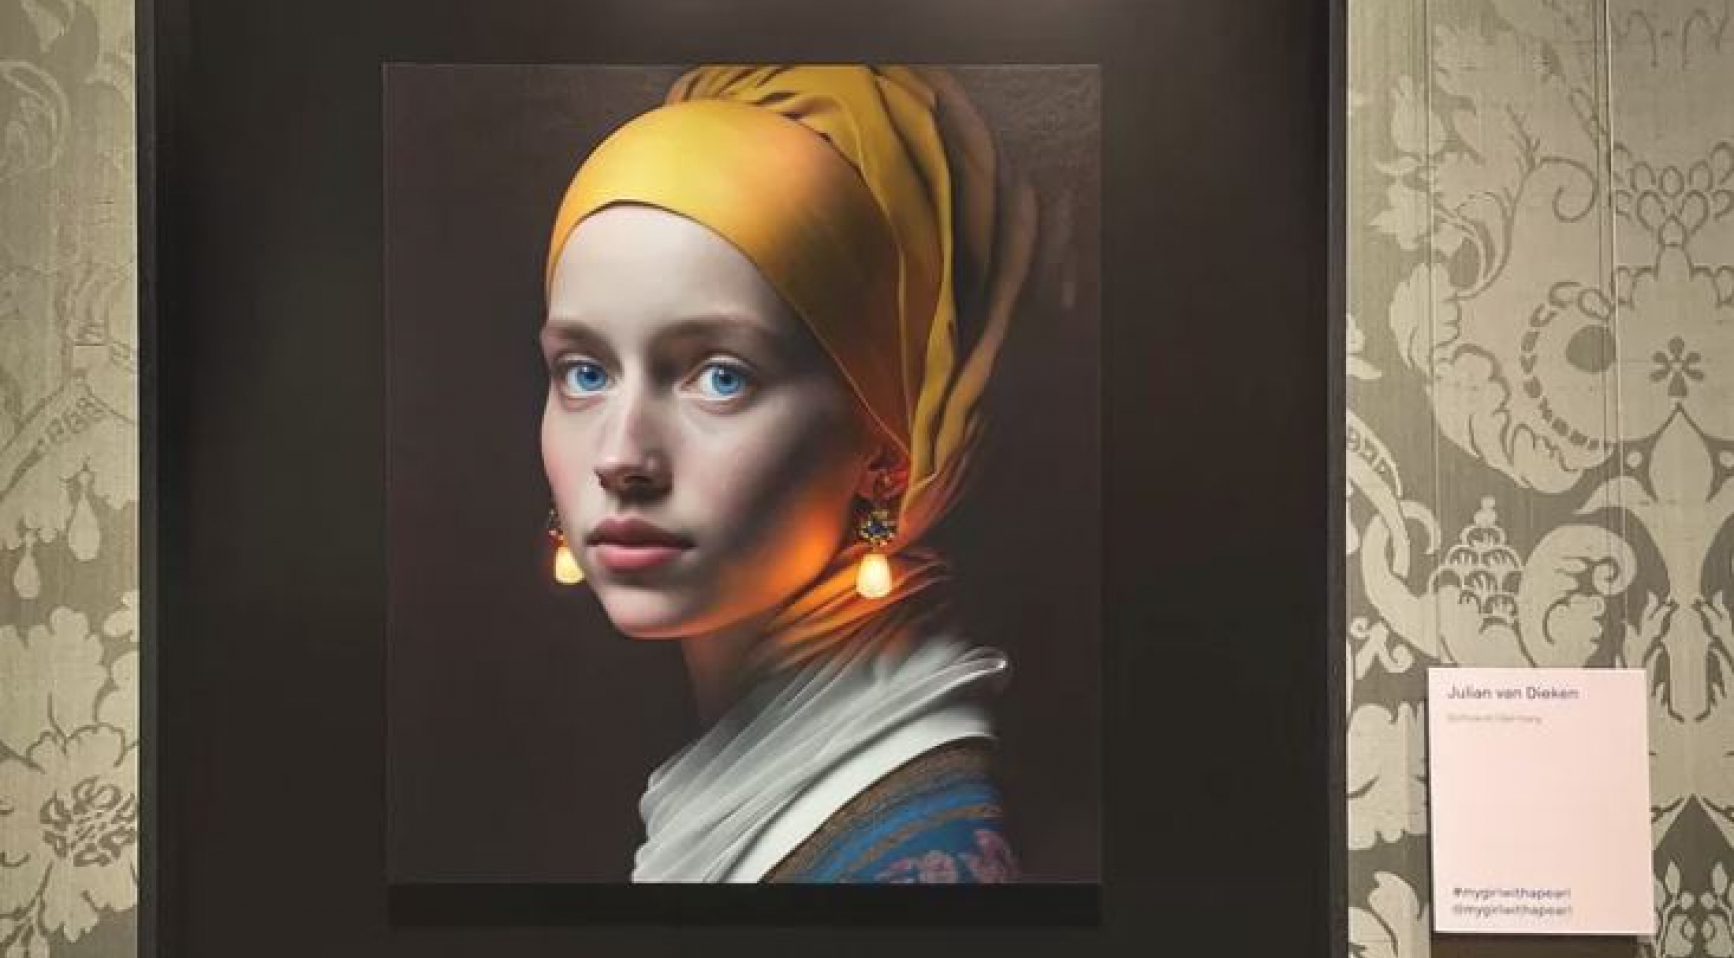 Artwork produced by artificial intelligence in the Netherlands